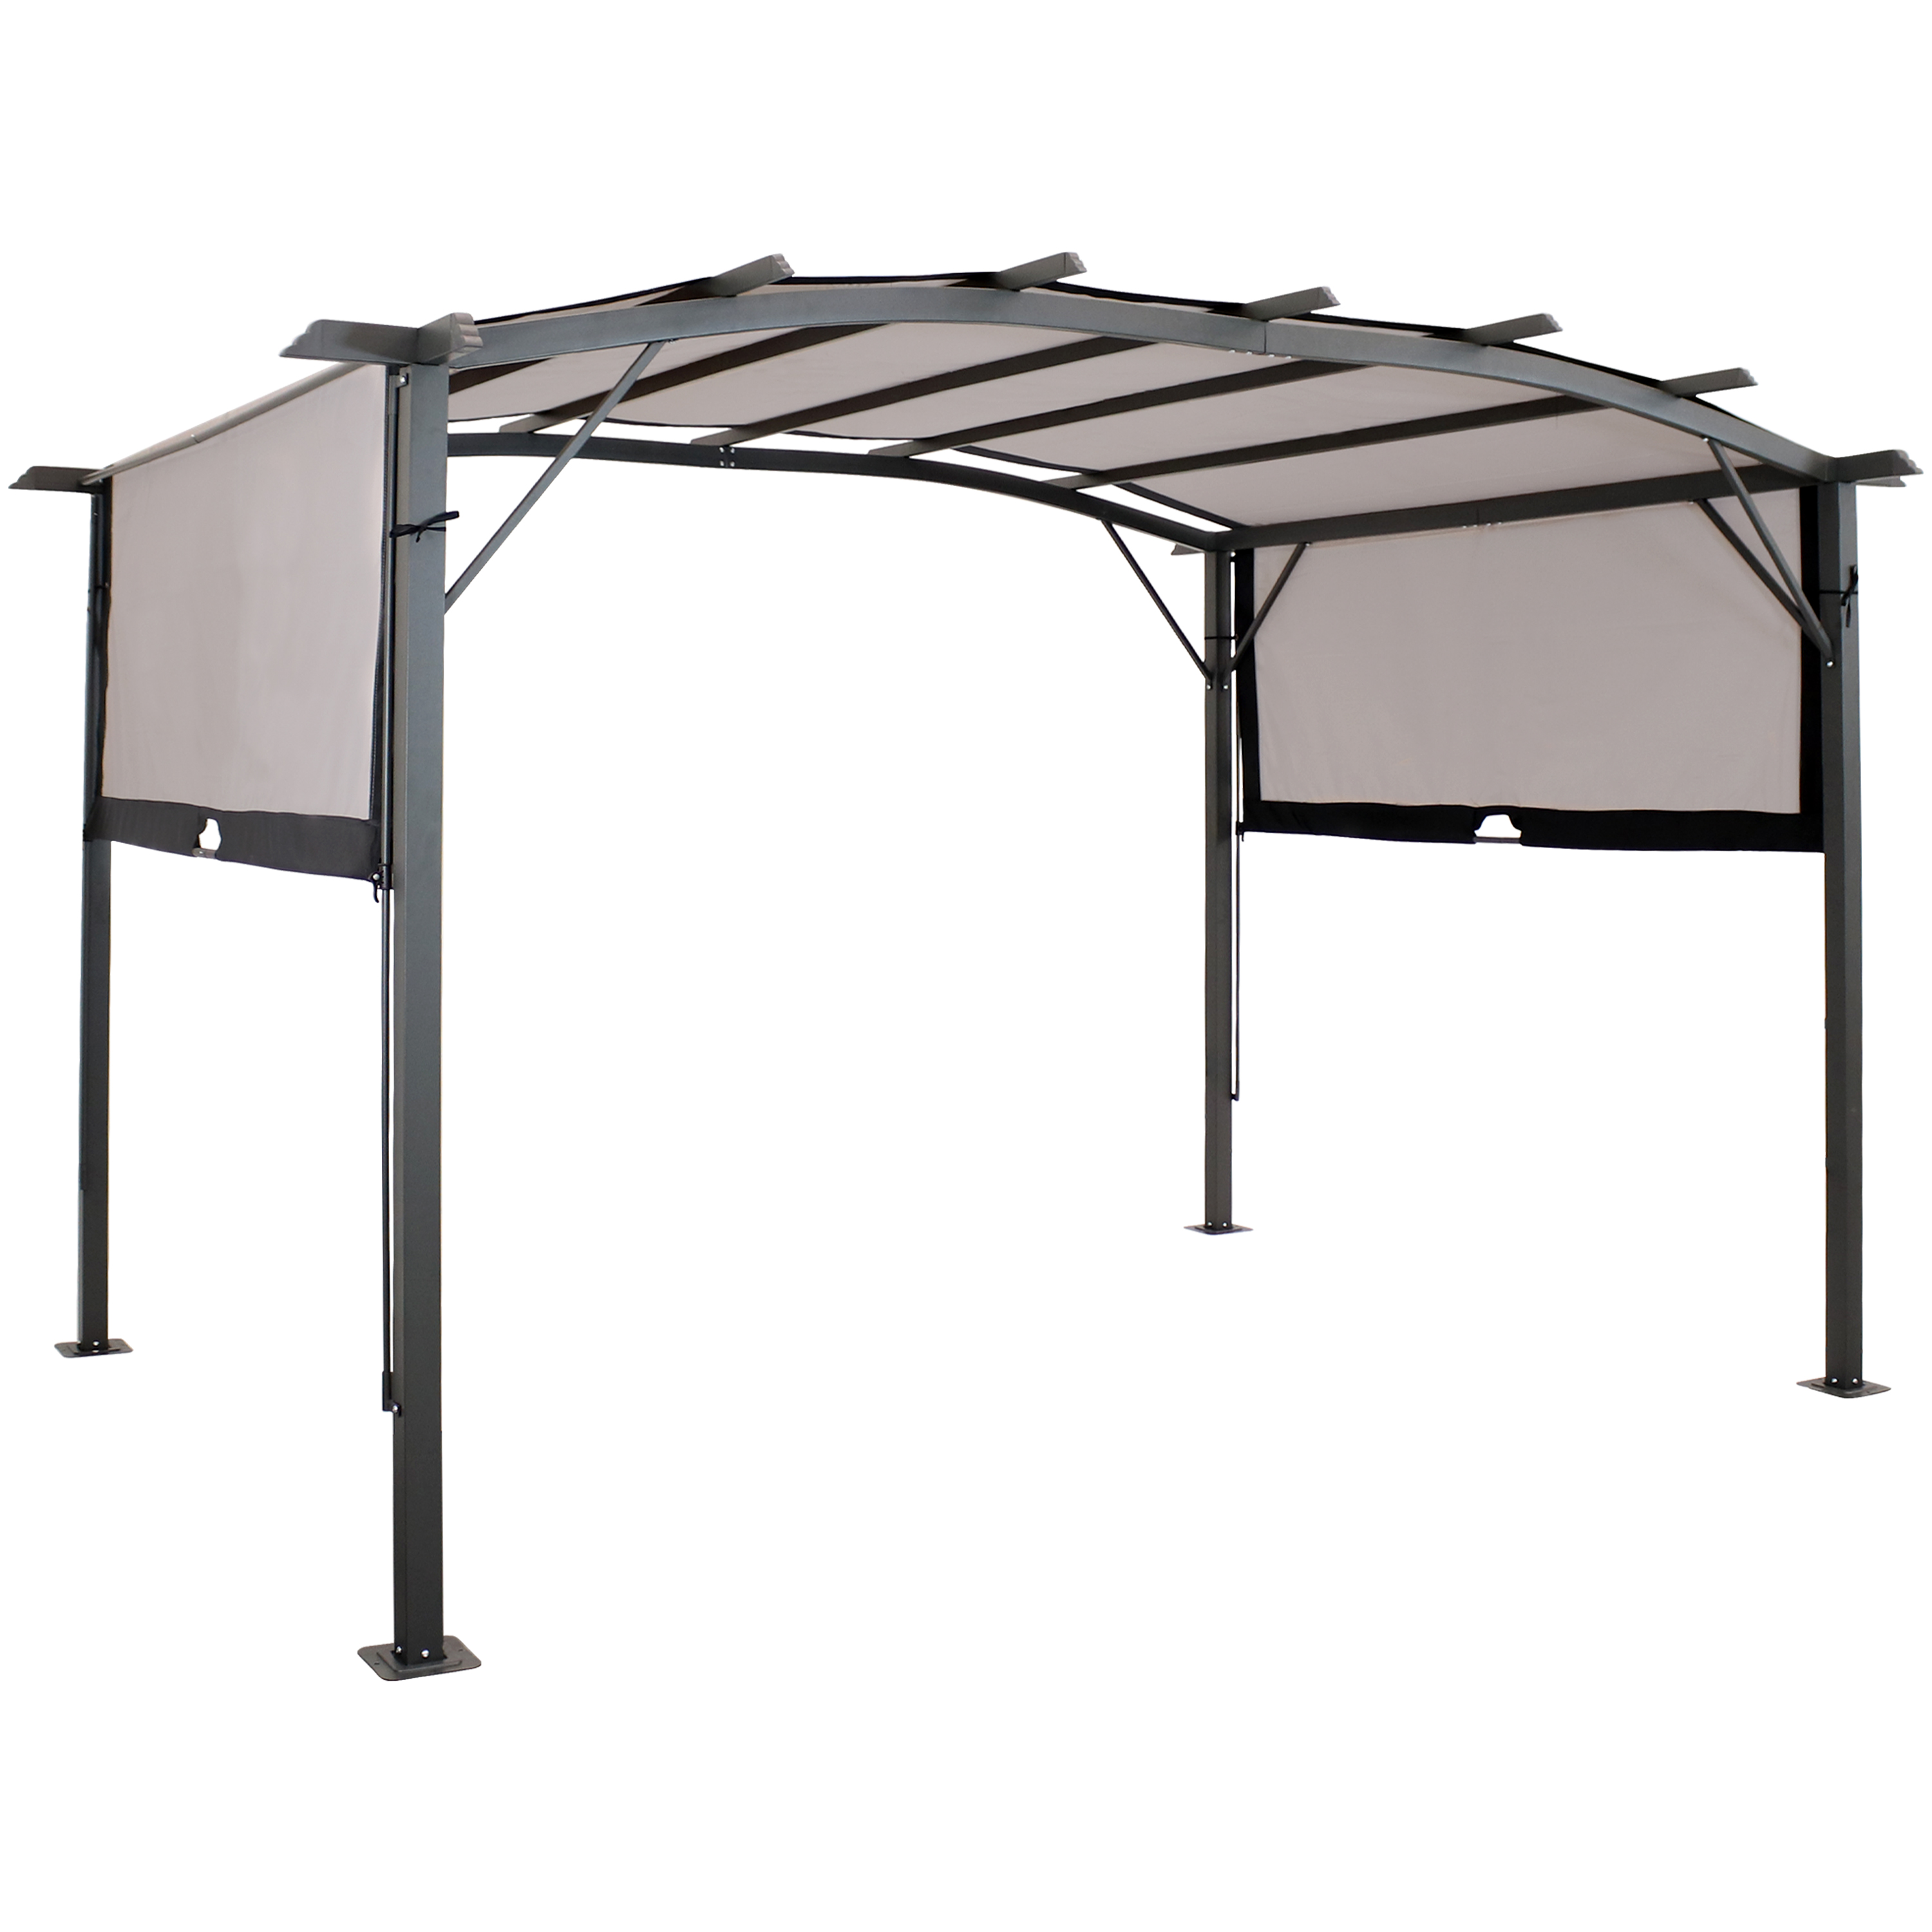 9 x 12 Metal Arched Pergola with Retractable Canopy - Gray